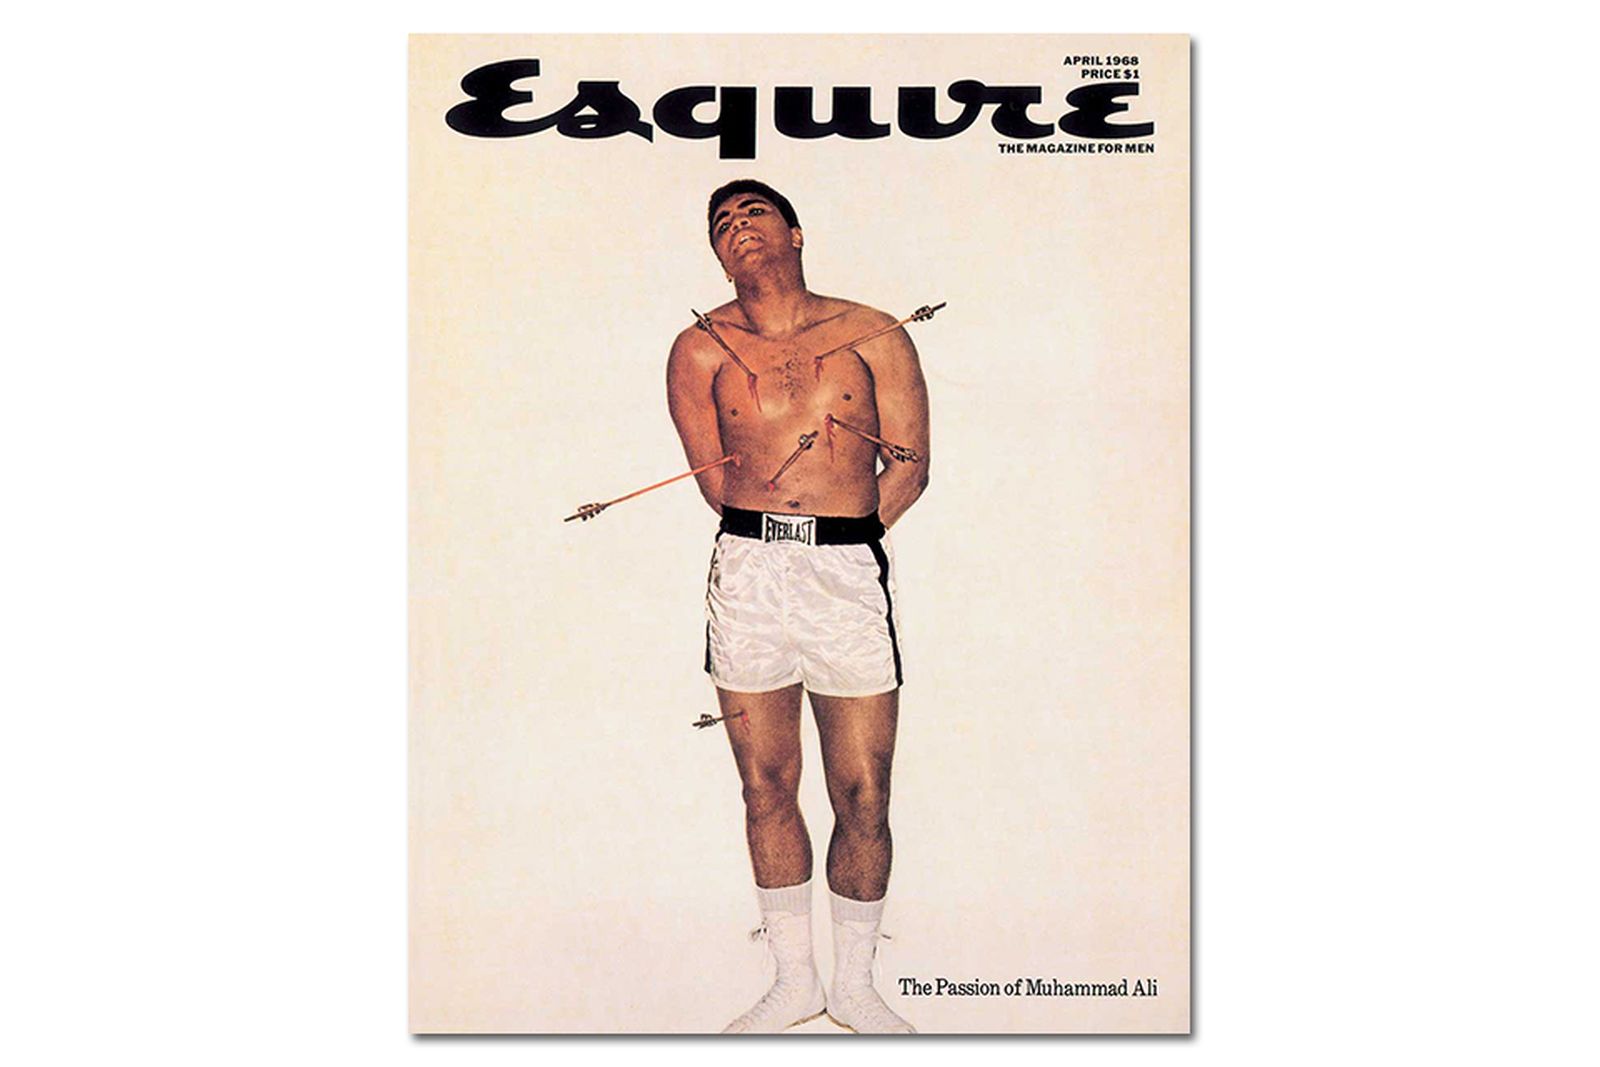 The-20-Most-Memorable-Magazine-Covers-of-All-Time-010